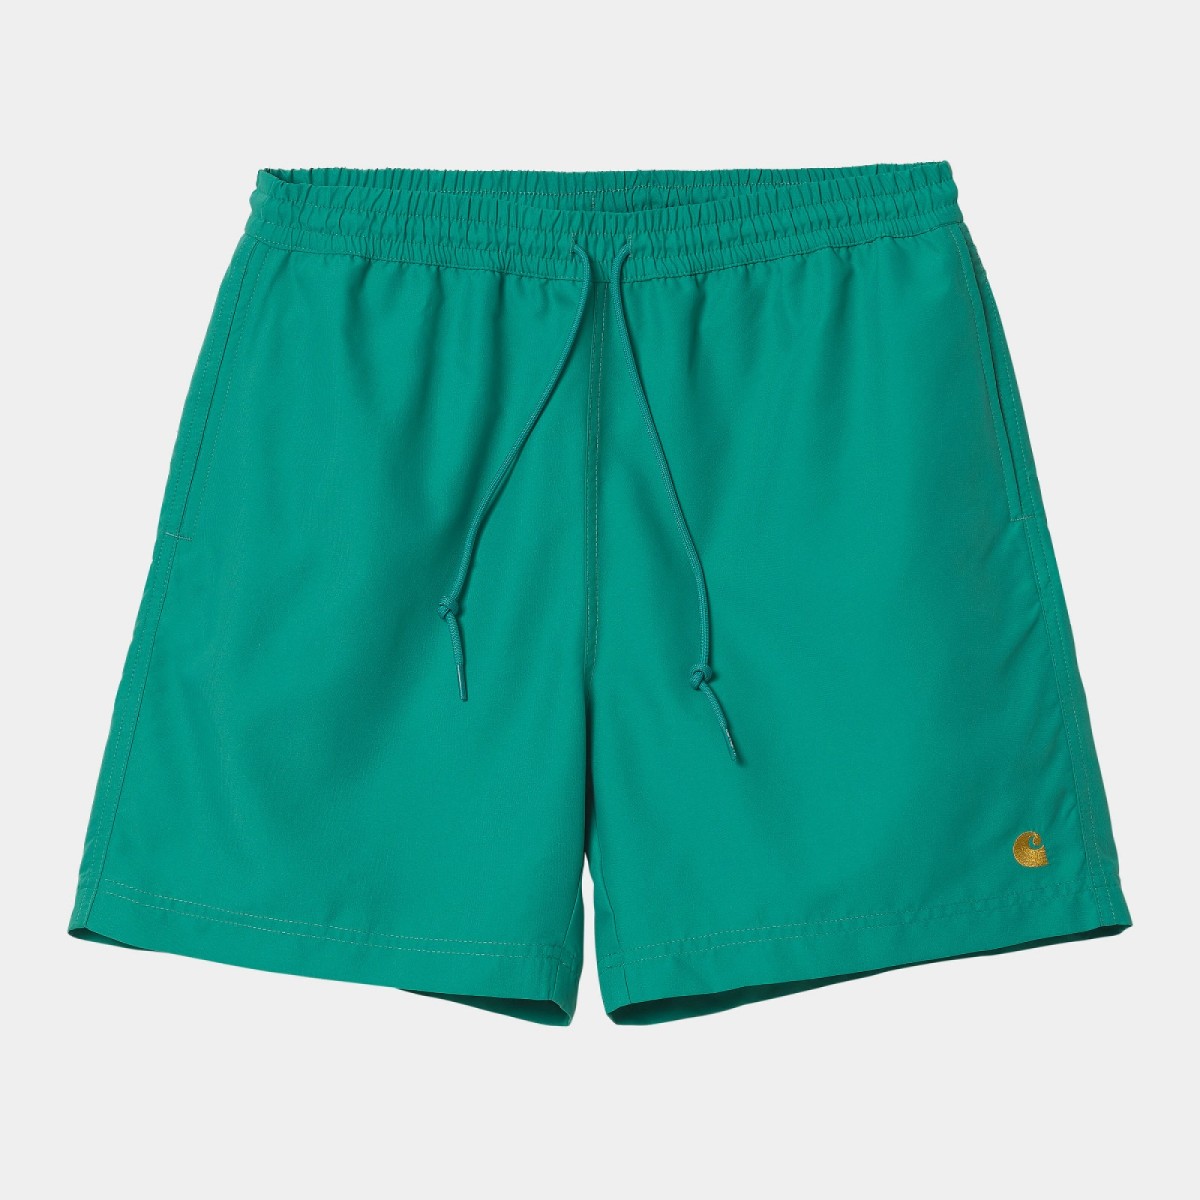 Carhartt WIP Chase Swim Trunks The Chase Swim Trunk is constructed from ...